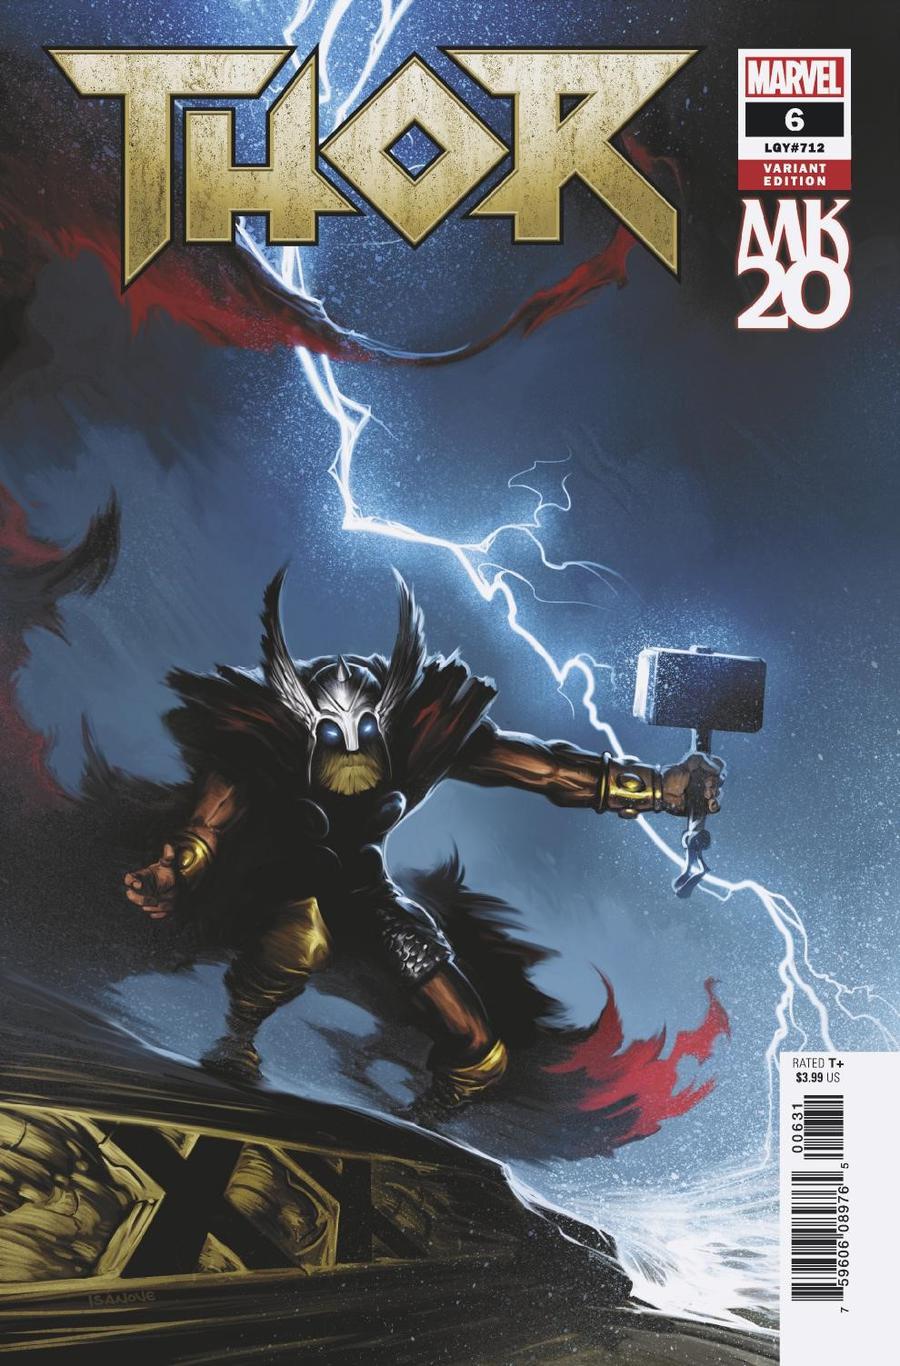 Thor Vol 5 #6 Cover C Variant Richard Isanove MKXX Cover